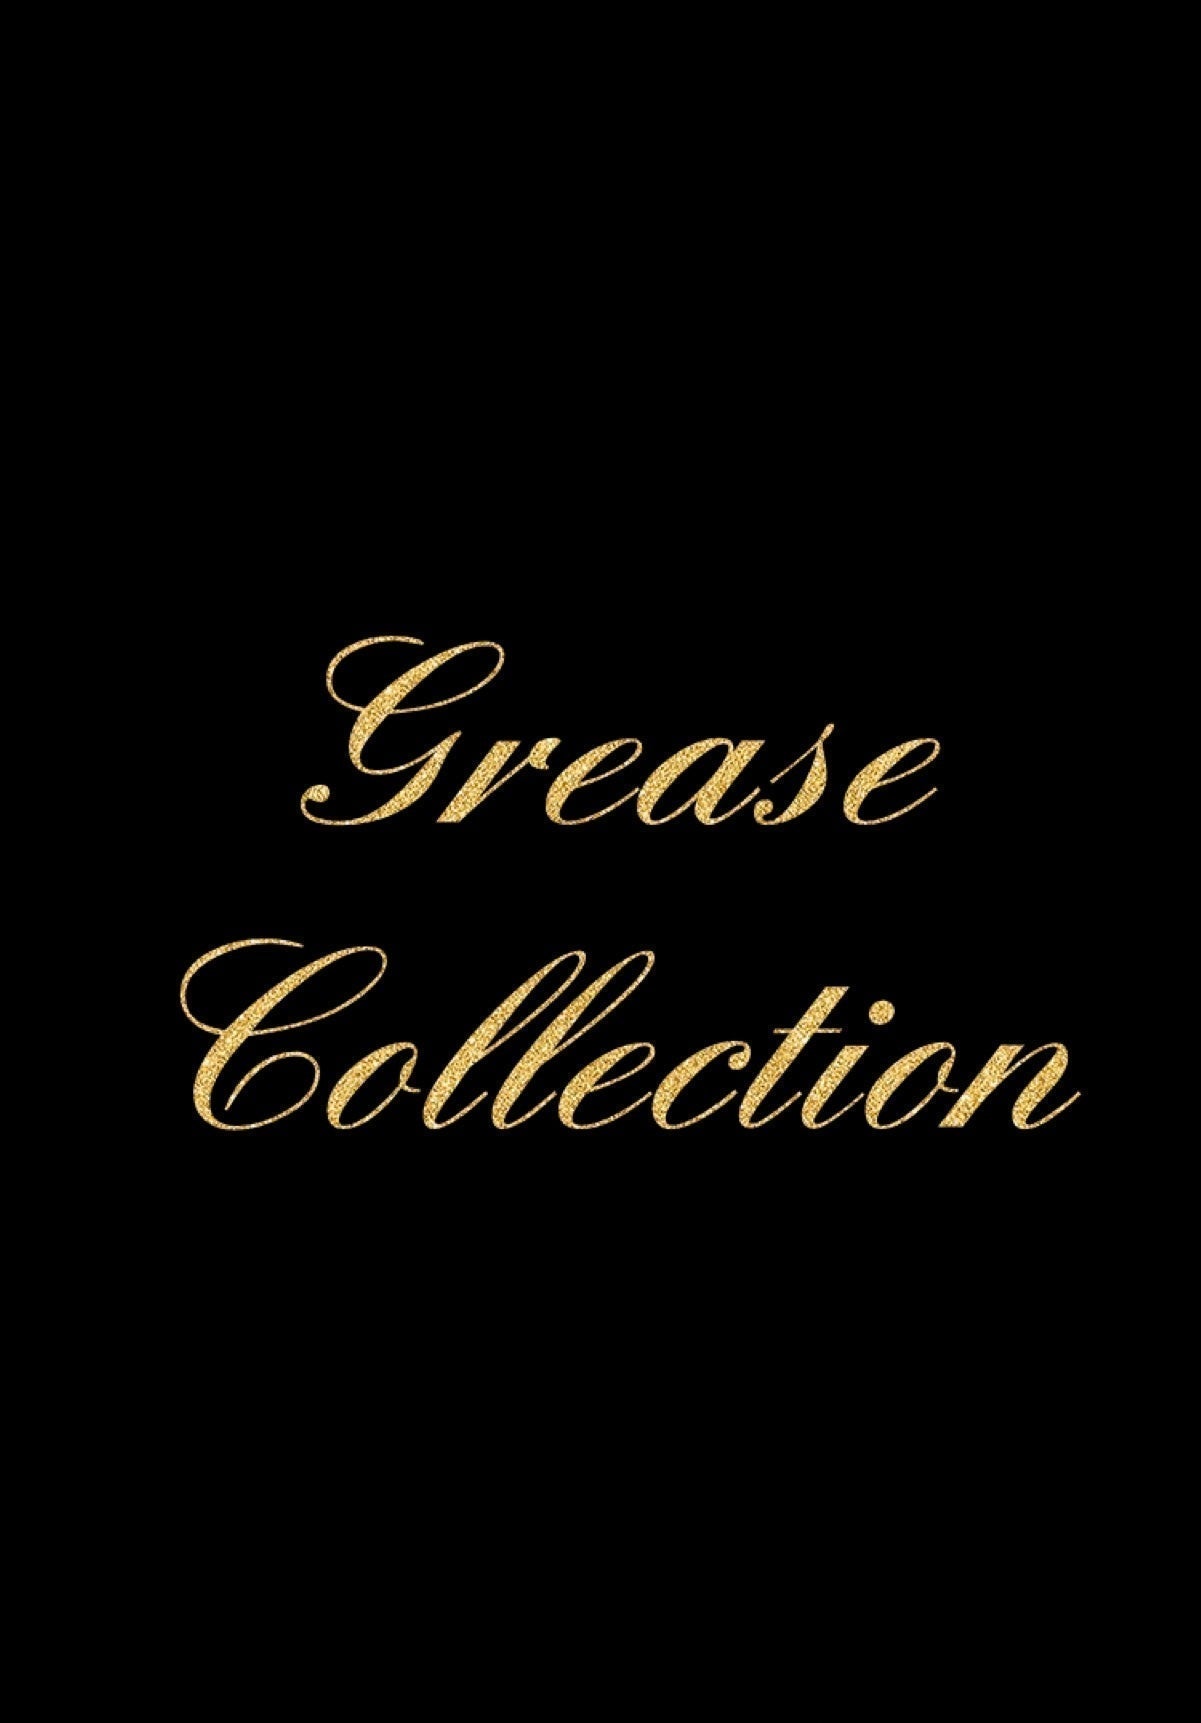 Marty - Grease Collection